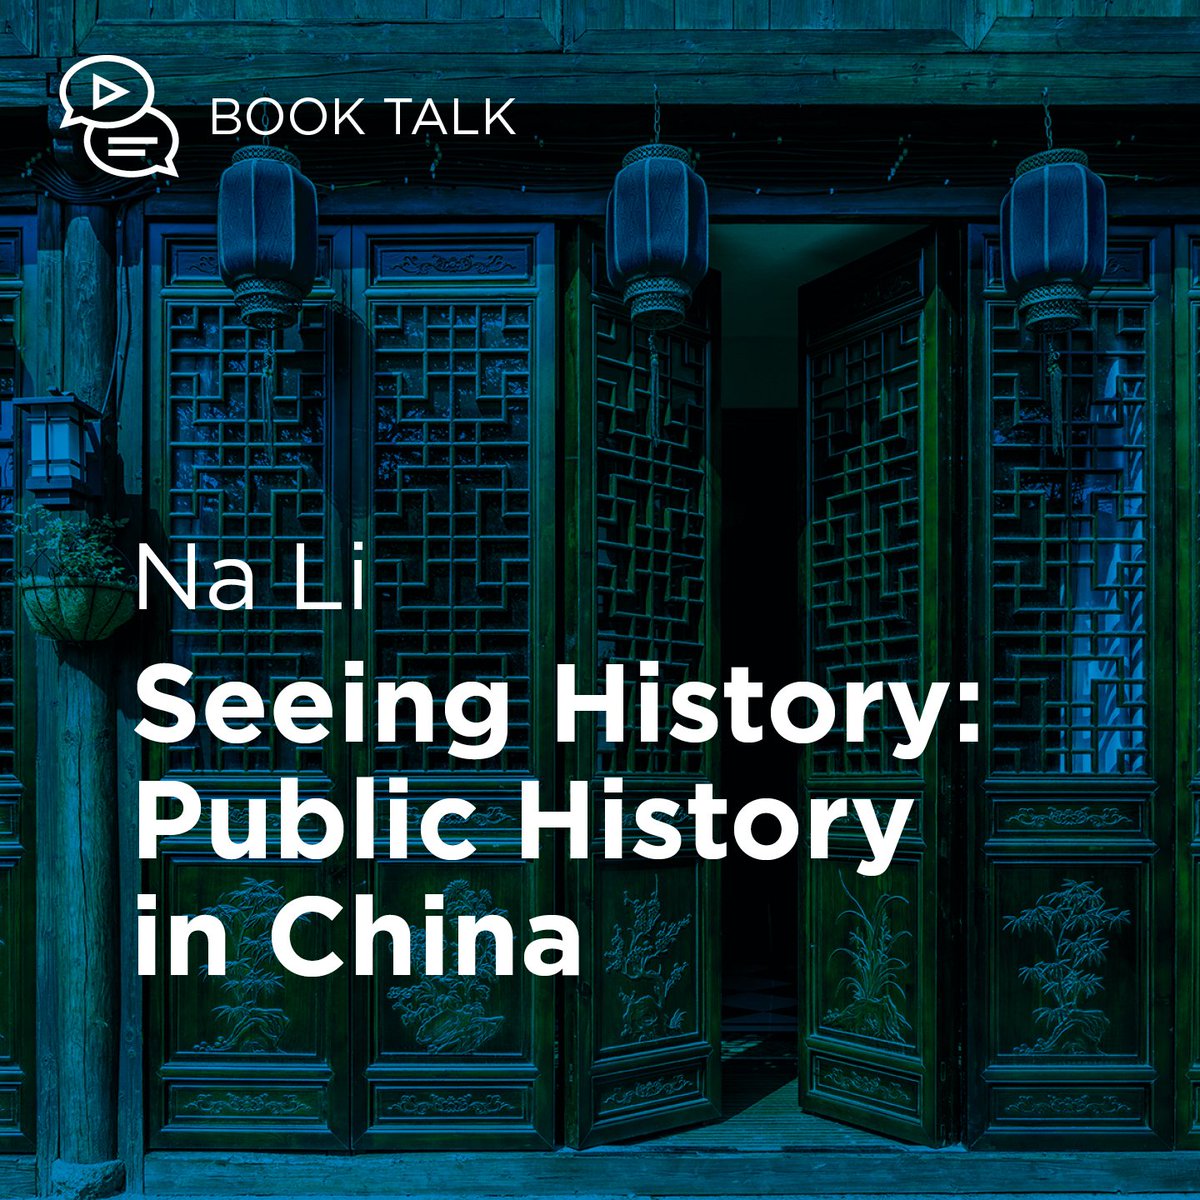 When we think about #PublicHistory, we think of preservation and heritage, or museums and monuments. What does public history look like in China? Listen to Na Li, a pioneer of the field, in conversation with @RabeaRi in the latest De Gruyter Book Talk! youtu.be/dtT72xoWqDI?fe…